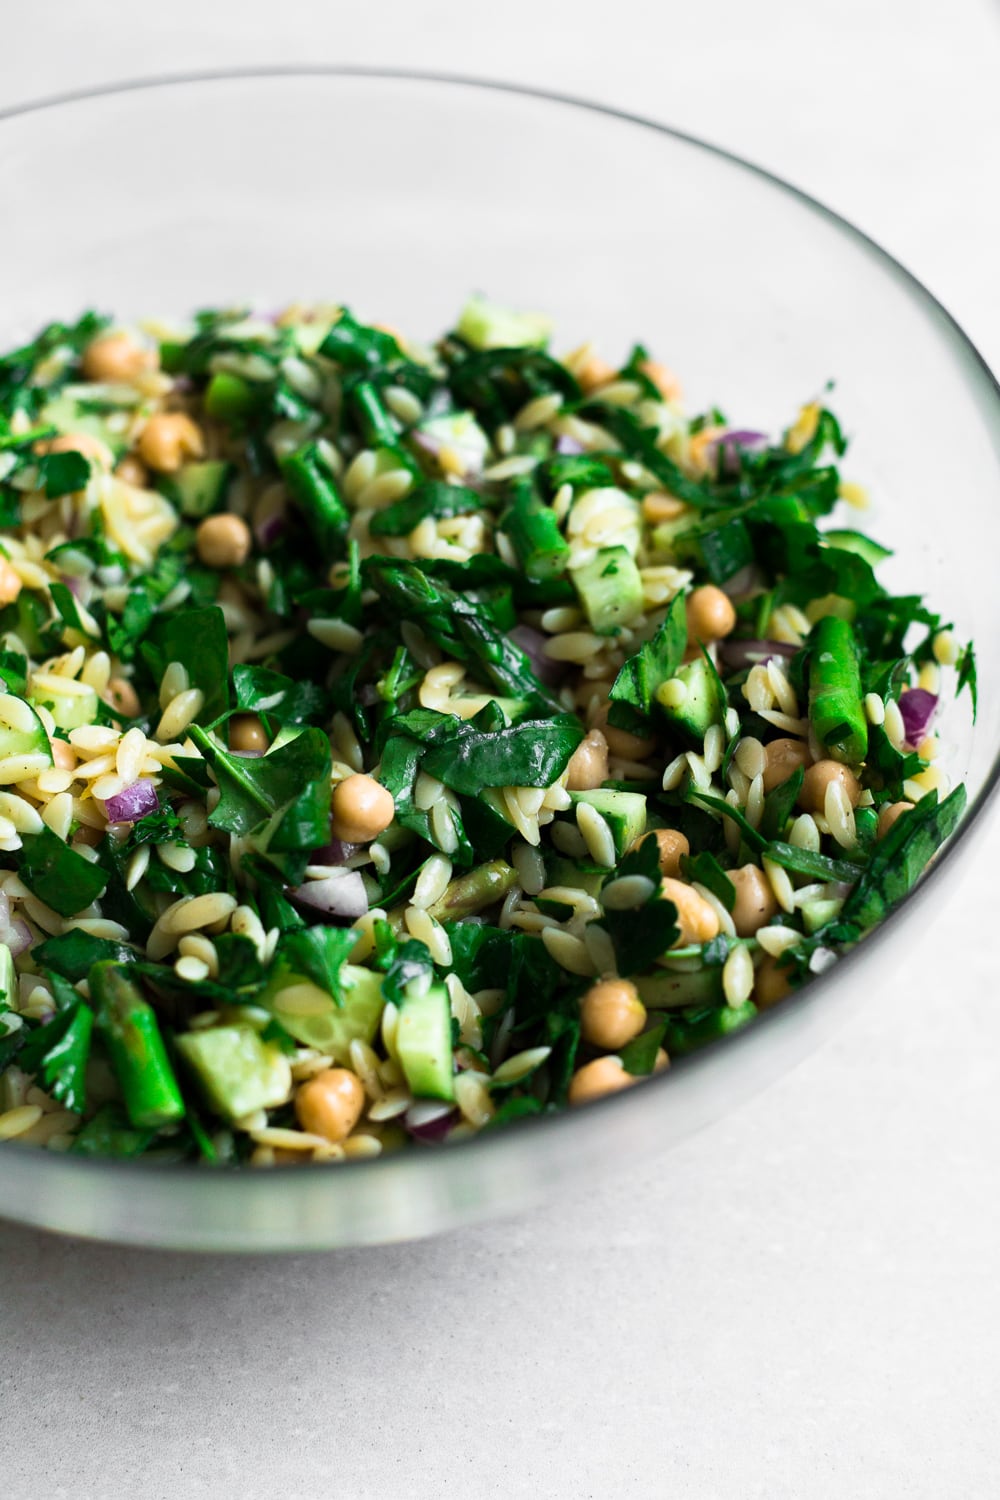 A delicious, fresh and bright Vegan Lemon Orzo Salad with Chickpeas. Ready in under 30 minutes and bursting with fresh Veggies and Herbs. #vegan #orzo #herbs #salad #healthy #simple #chickpeas #lemon #dressing #fast 